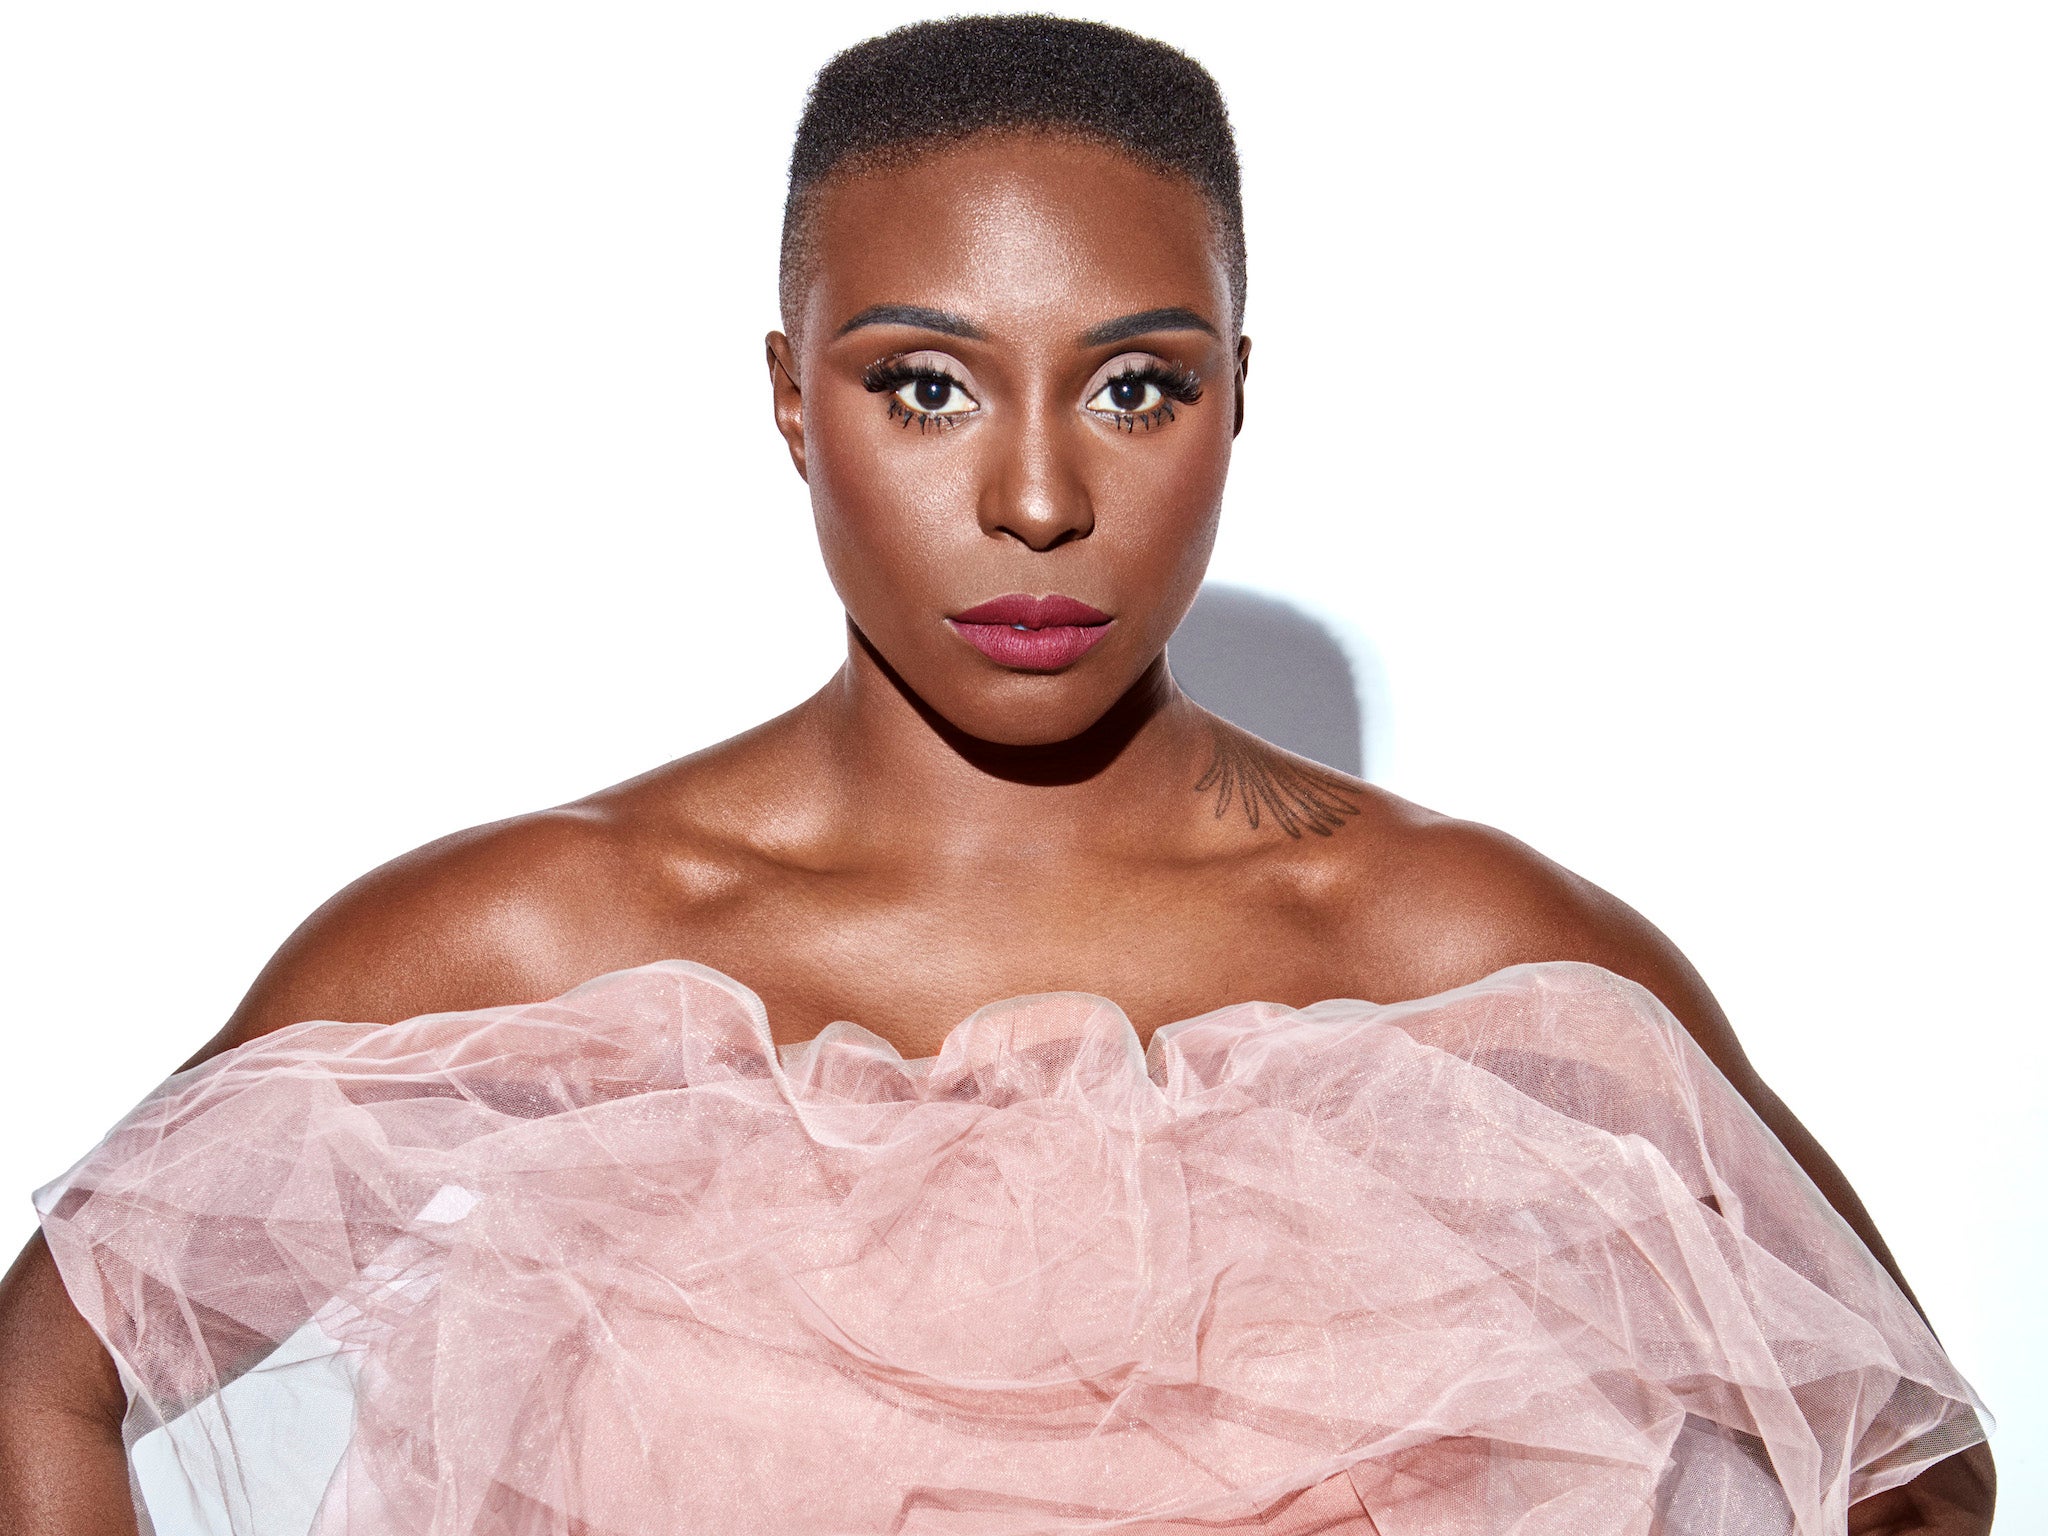 On her own terms: After being label-dumped via email, Mvula returns in strength with ‘Pink Noise’